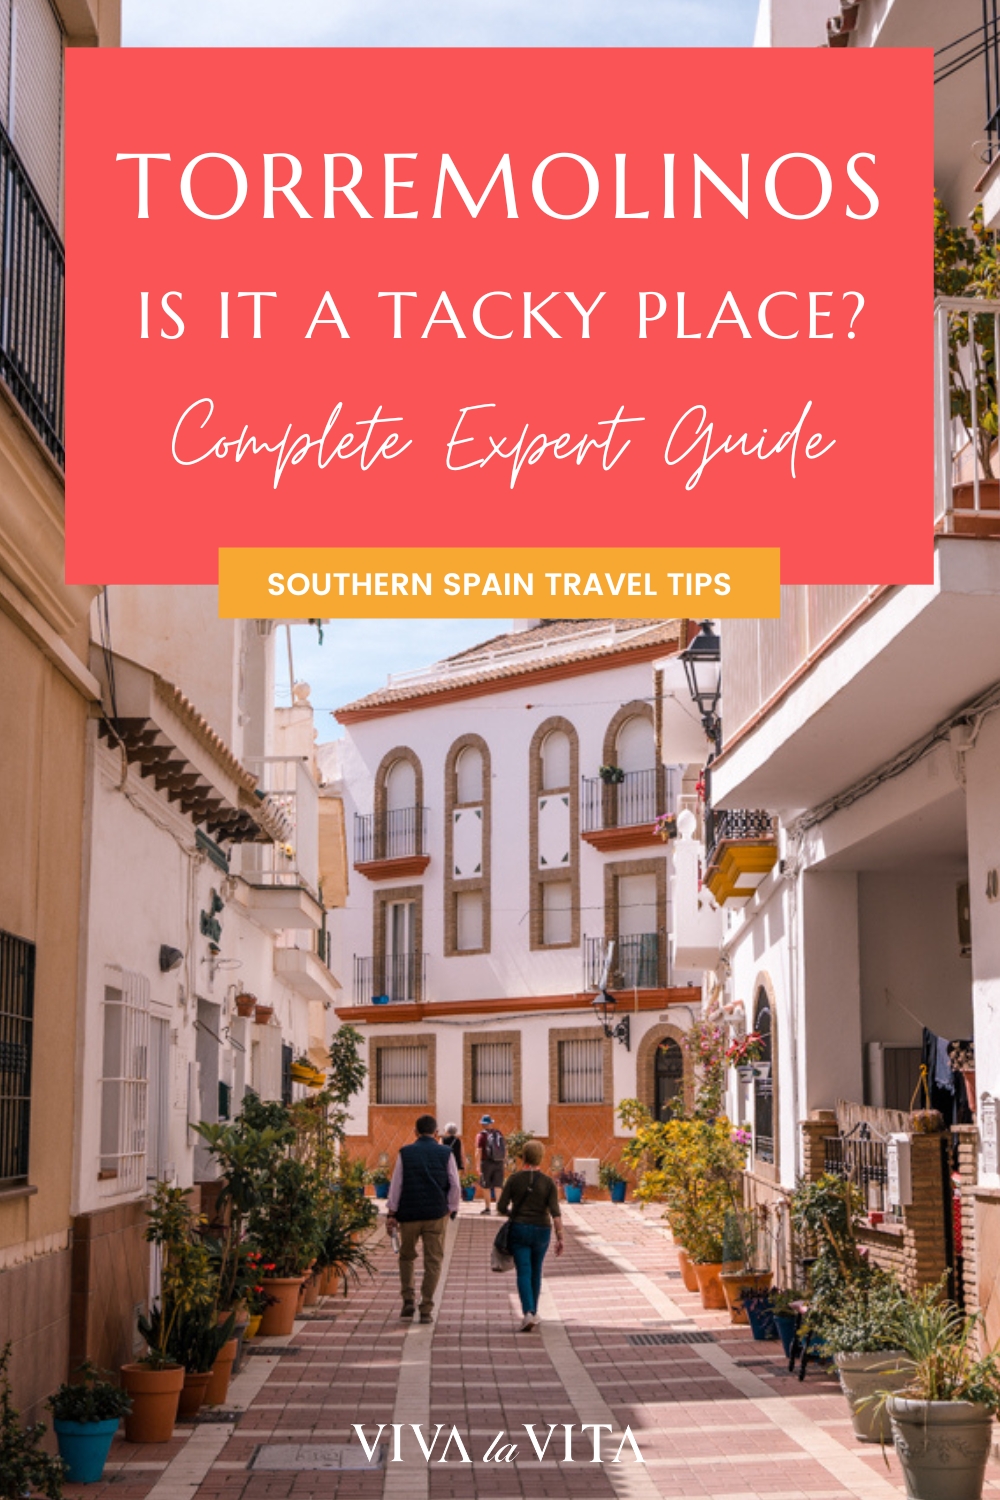 pinterest image showing the old town of Torremolinos, with a headline that reads: torremolinos is it a tacky place, complete expert guide, Southern Spain travel tips